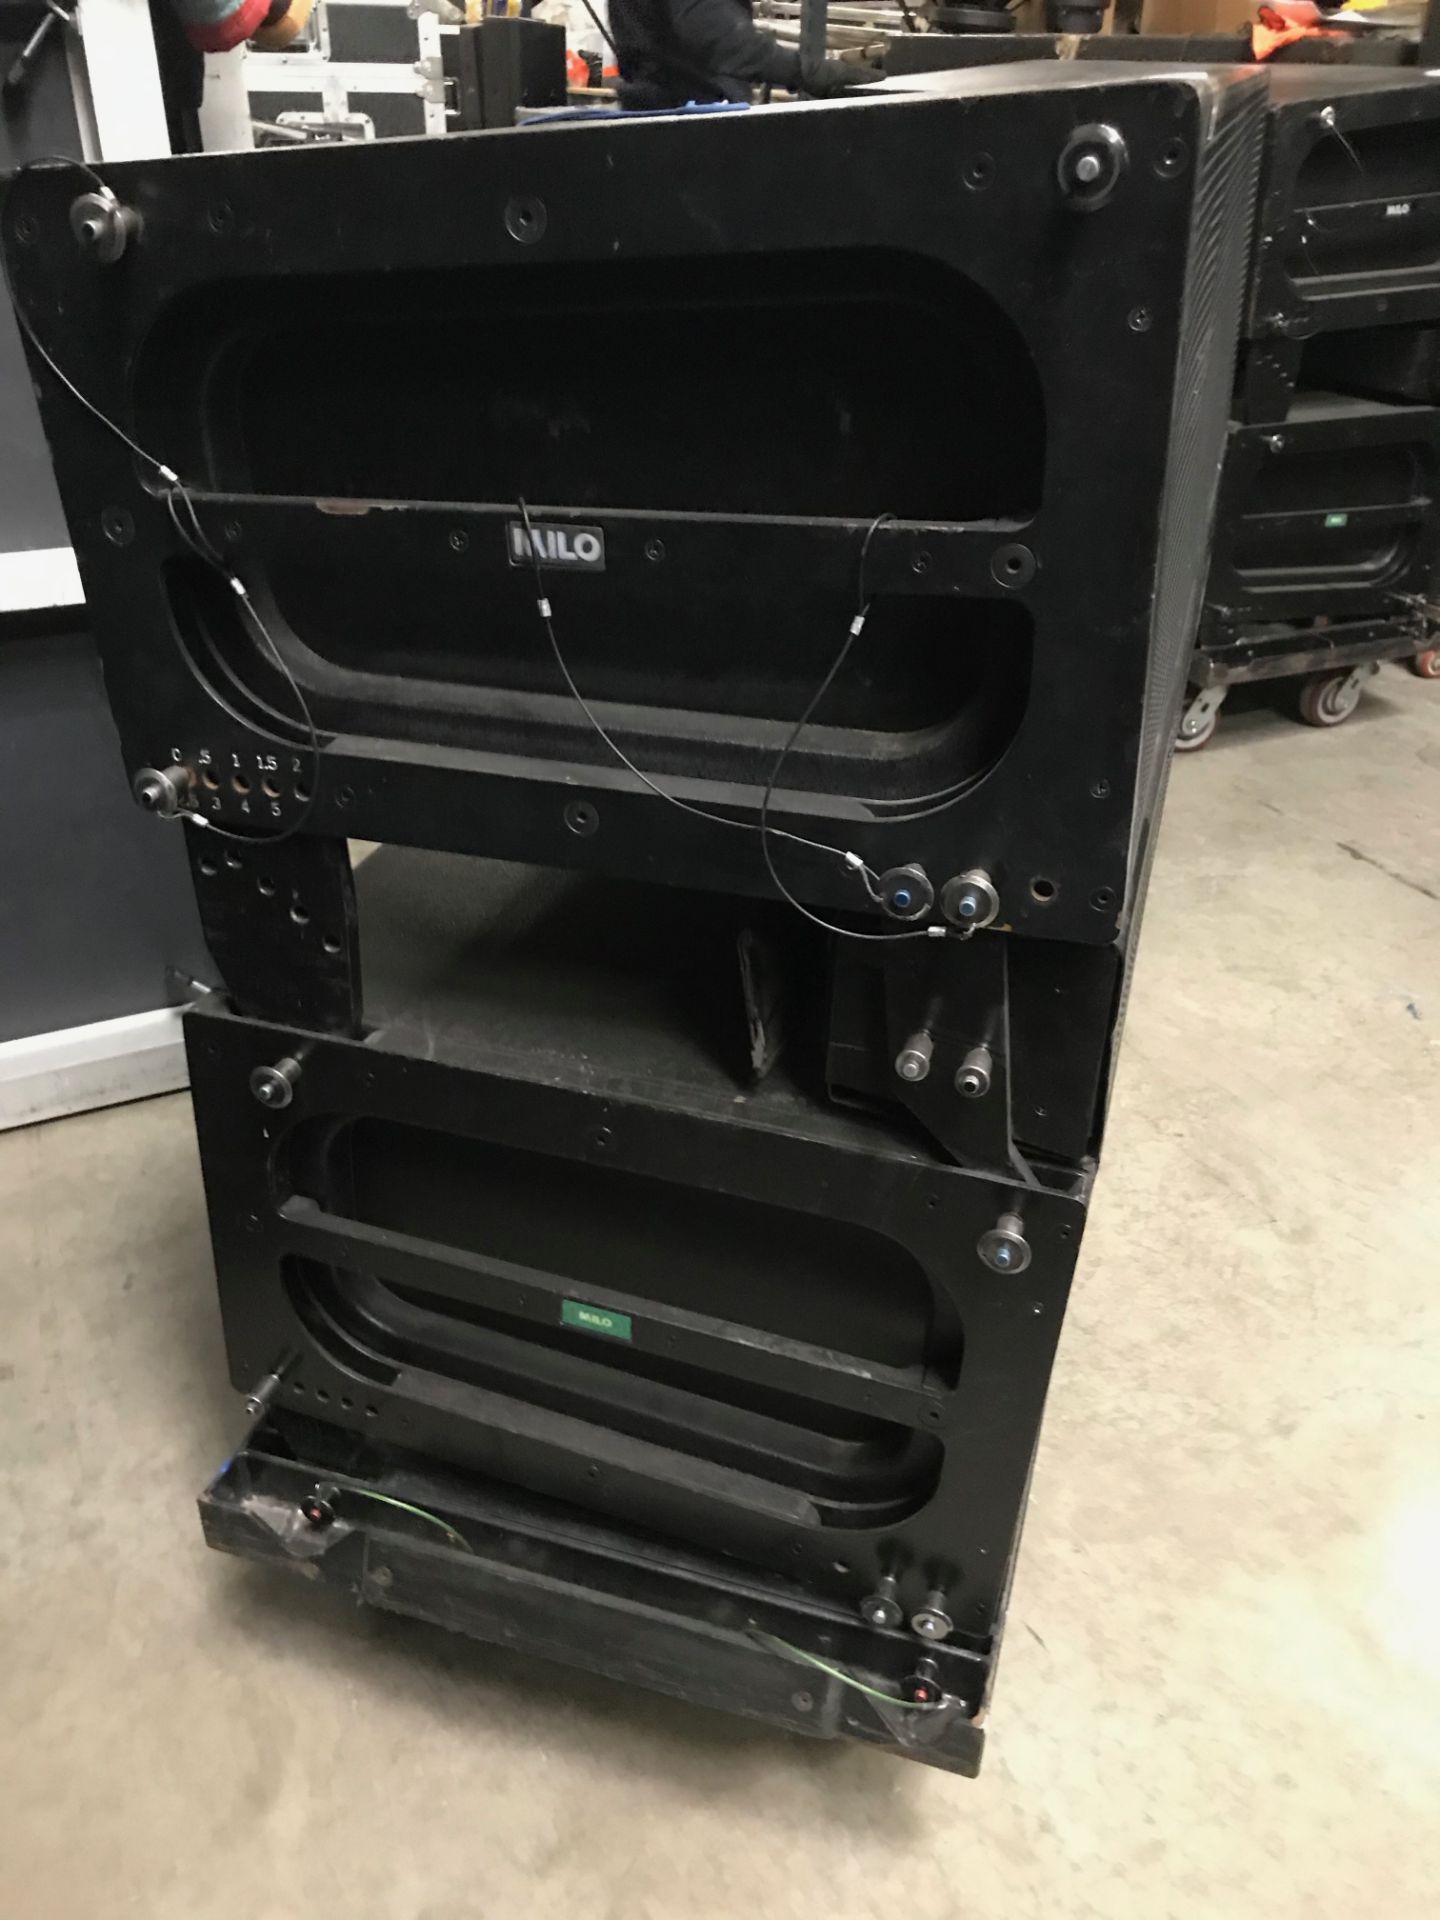 LOT OF: (2) MEYER SOUND, MILO HP MONITORS W CART AND ONE SPACER - Image 5 of 7